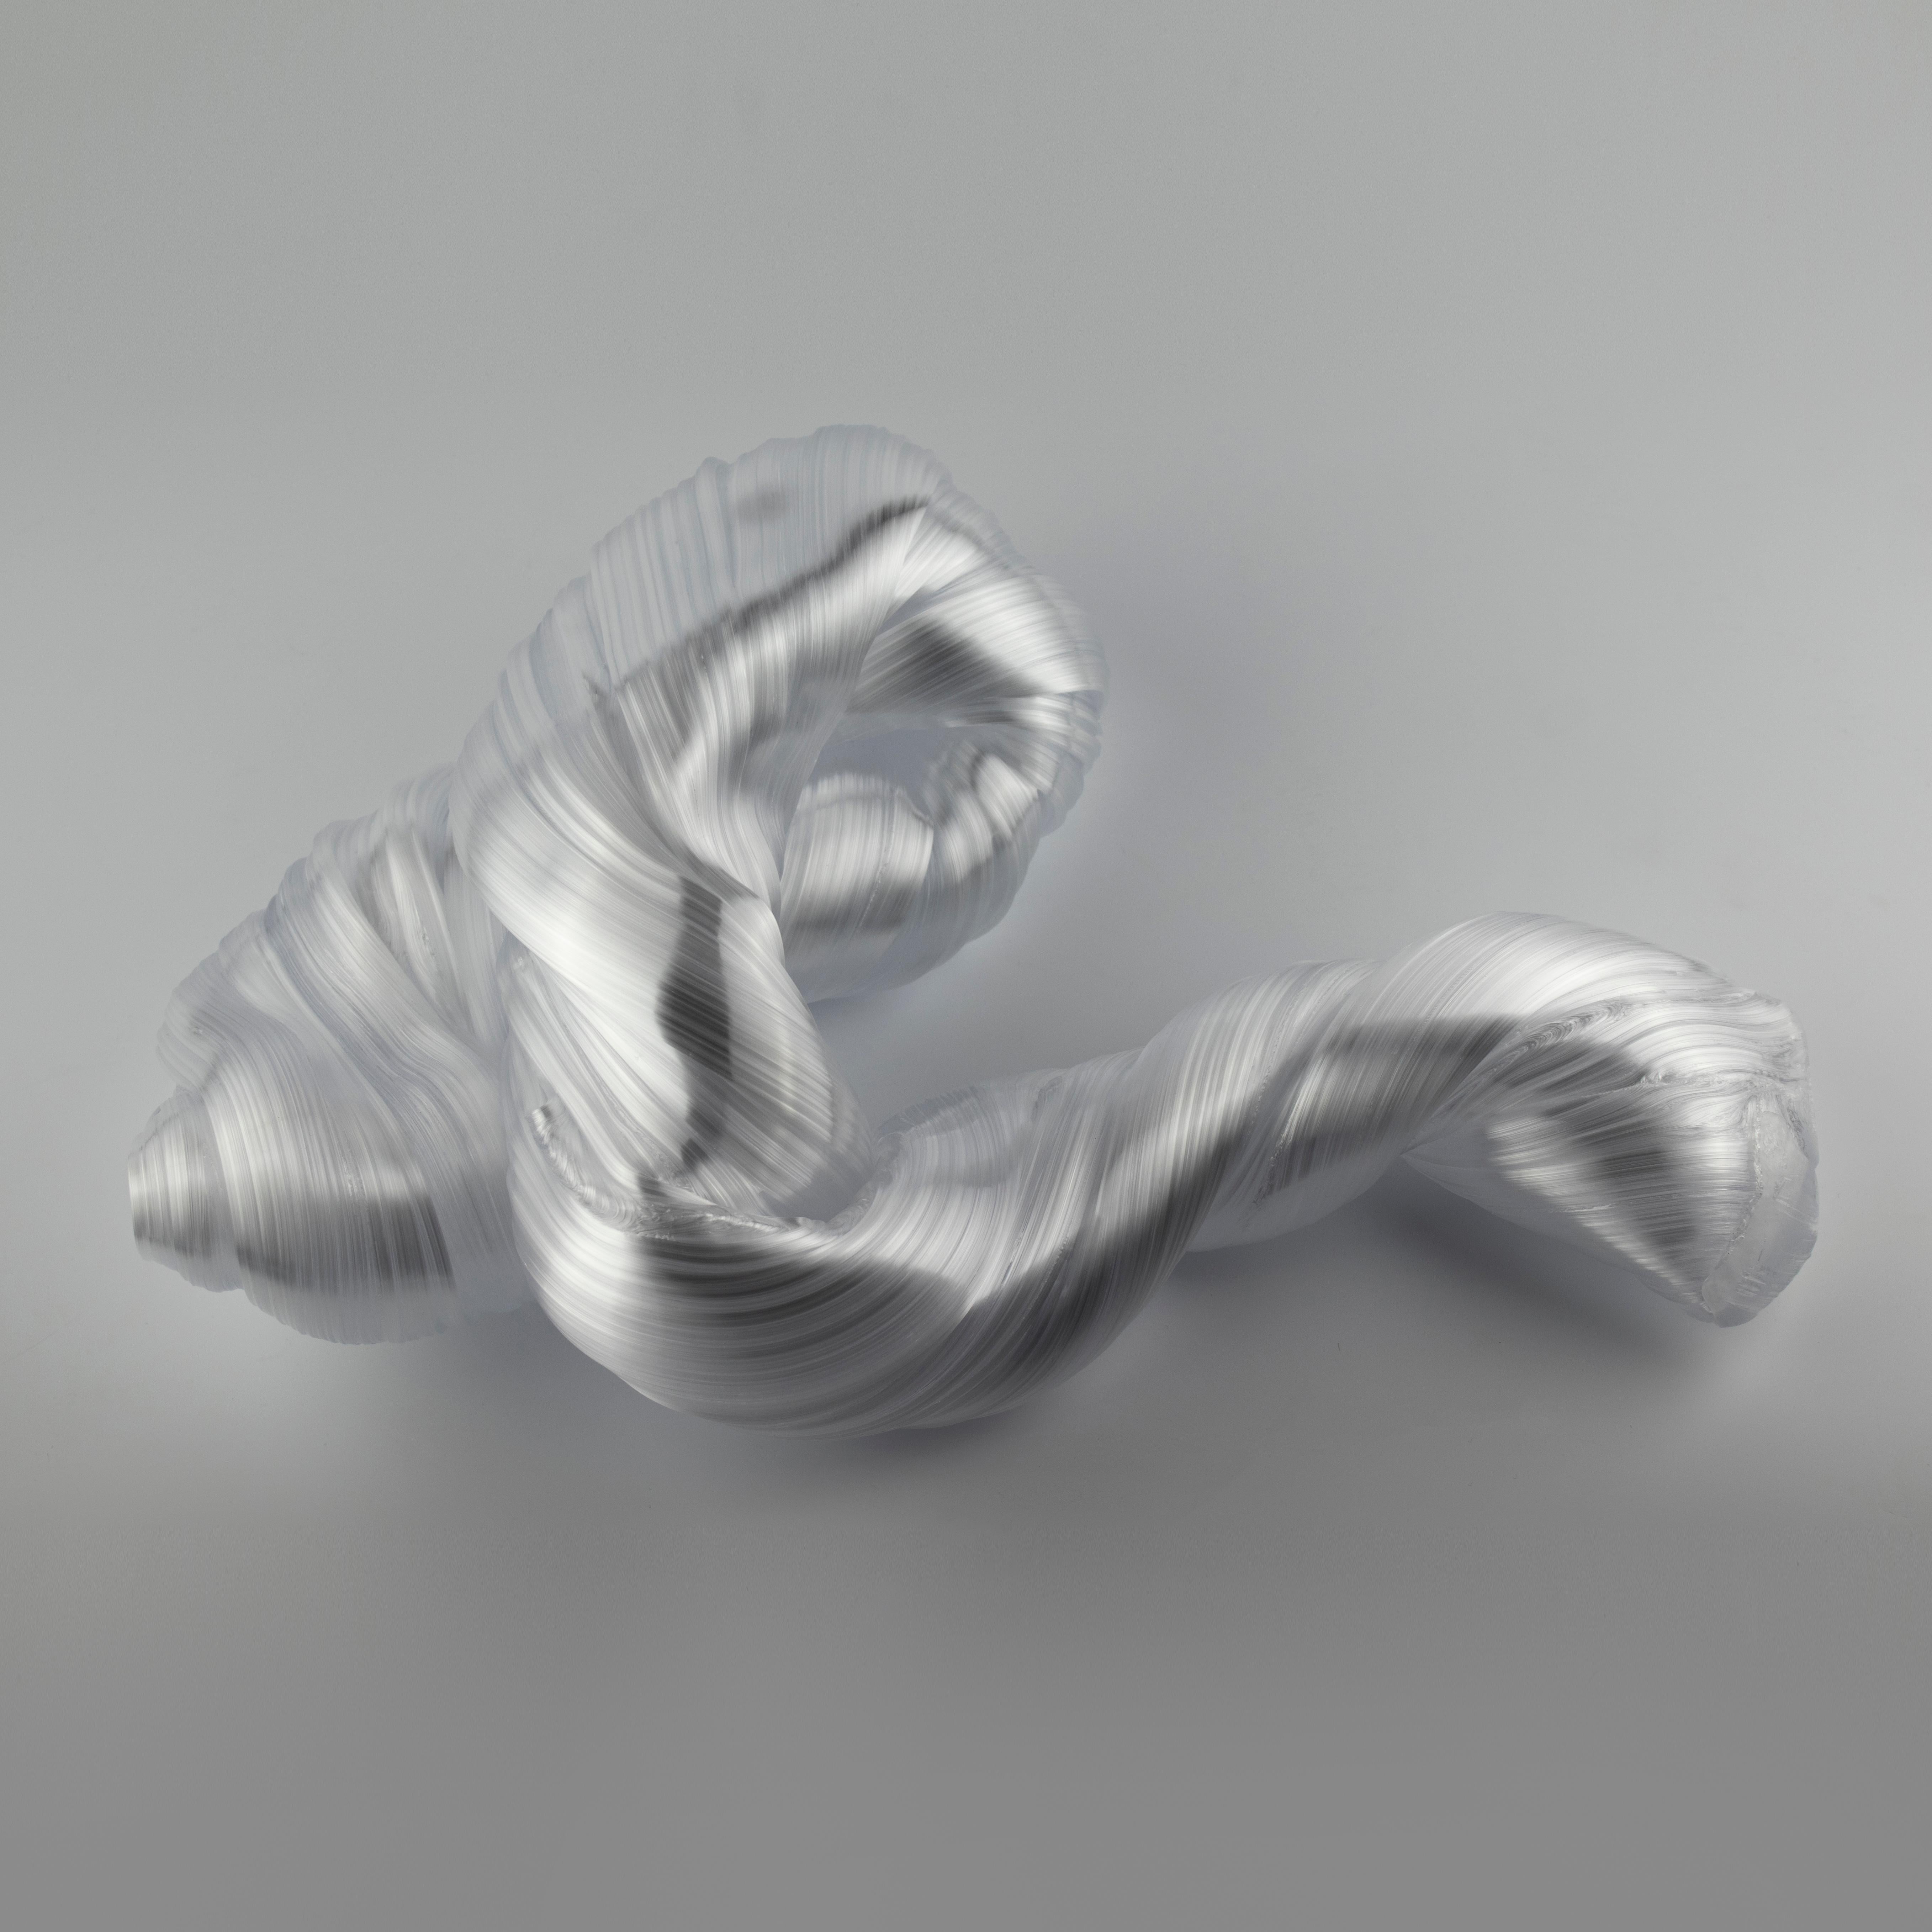 Art Glass Folded Rock in White, a Unique White Glass Sculpture by Maria Bang Espersen